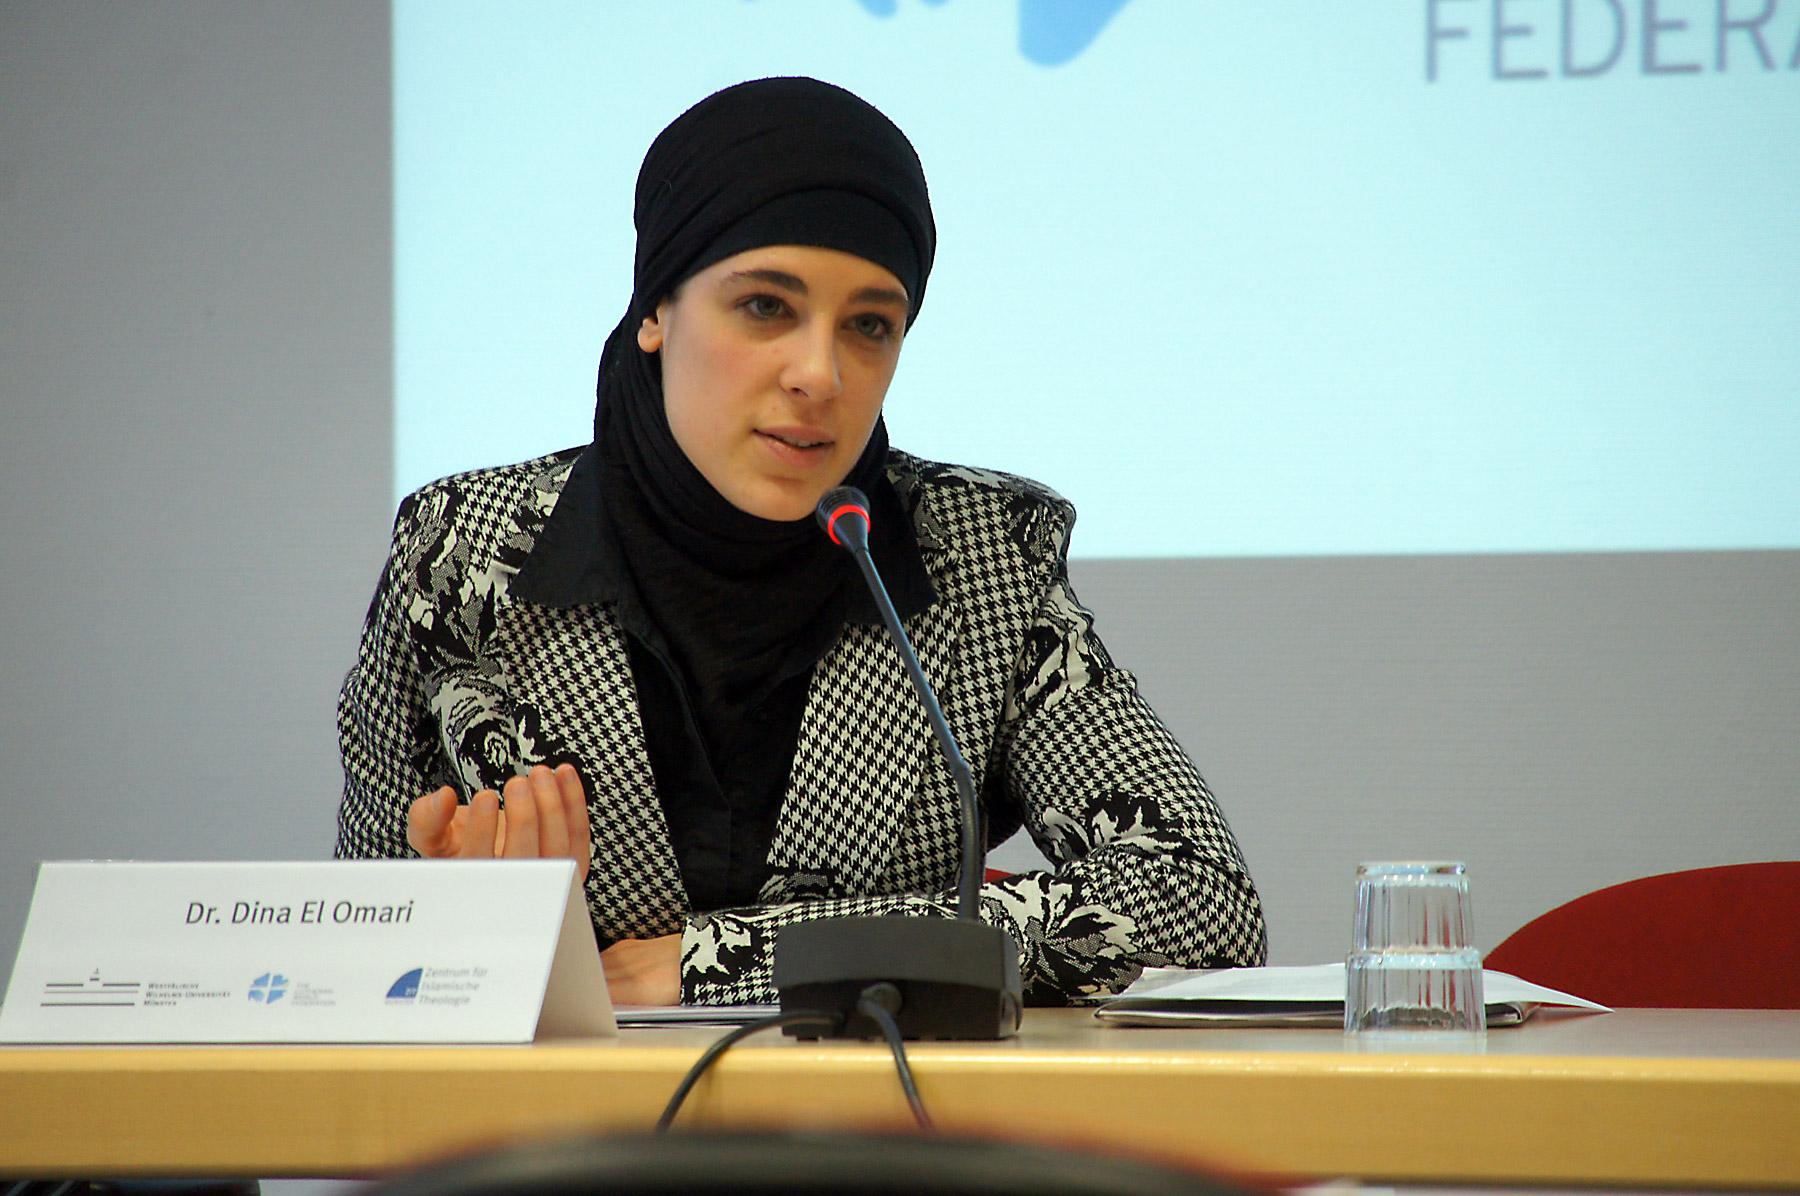 Dr. Dina El-Omari, Centre for Islamic Theology (ZIT) MÃ¼nster, gives a welcome address at the Christian-Muslim consultation 